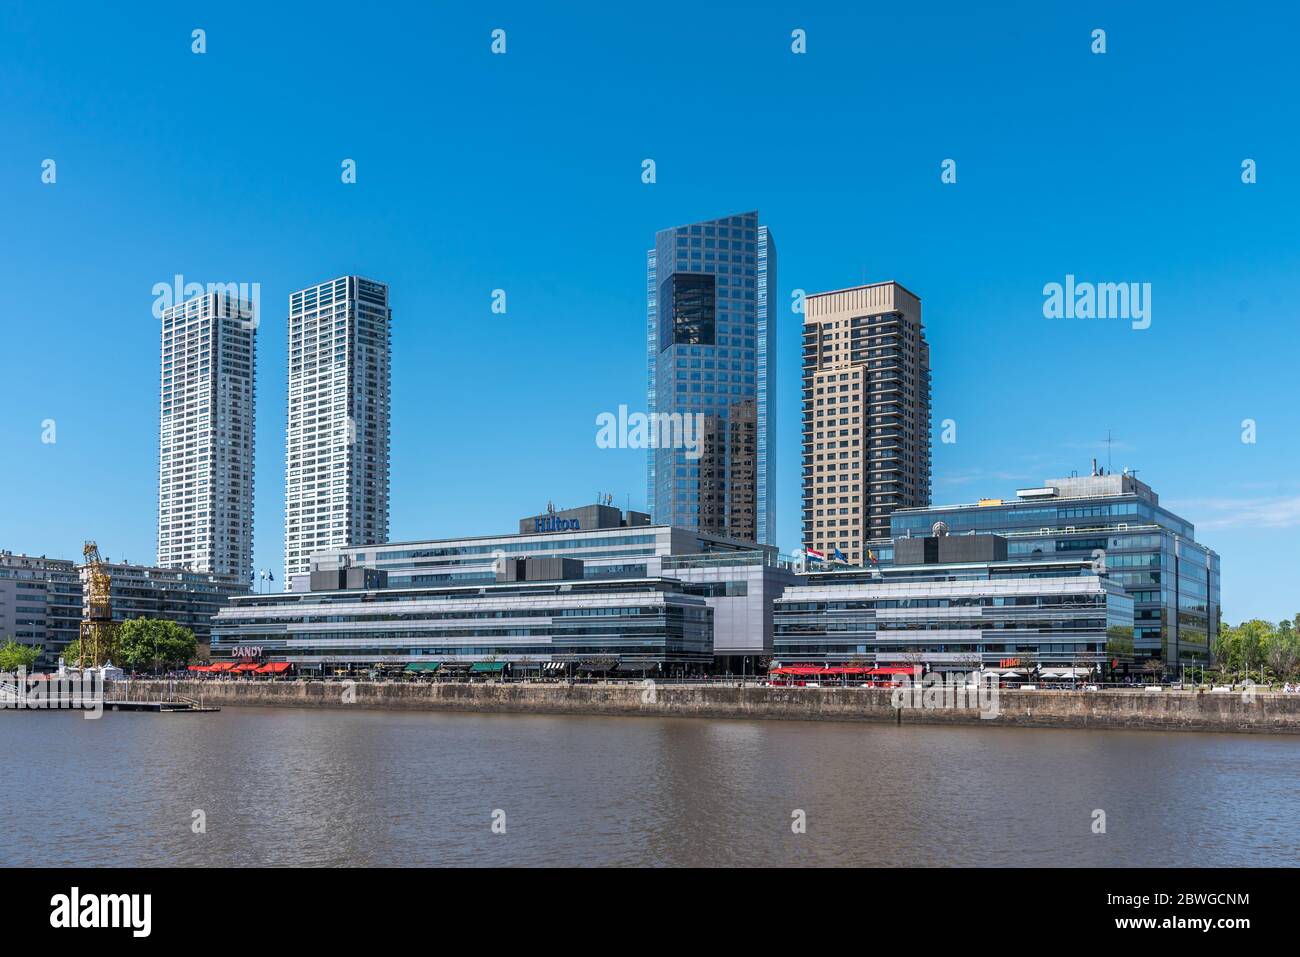 Buenos Aires, Puerto Madero, Argentina - October 10, 2019: Day view of the buildings of the financial district in Puerto Madero, Buenos Aires. Stock Photo